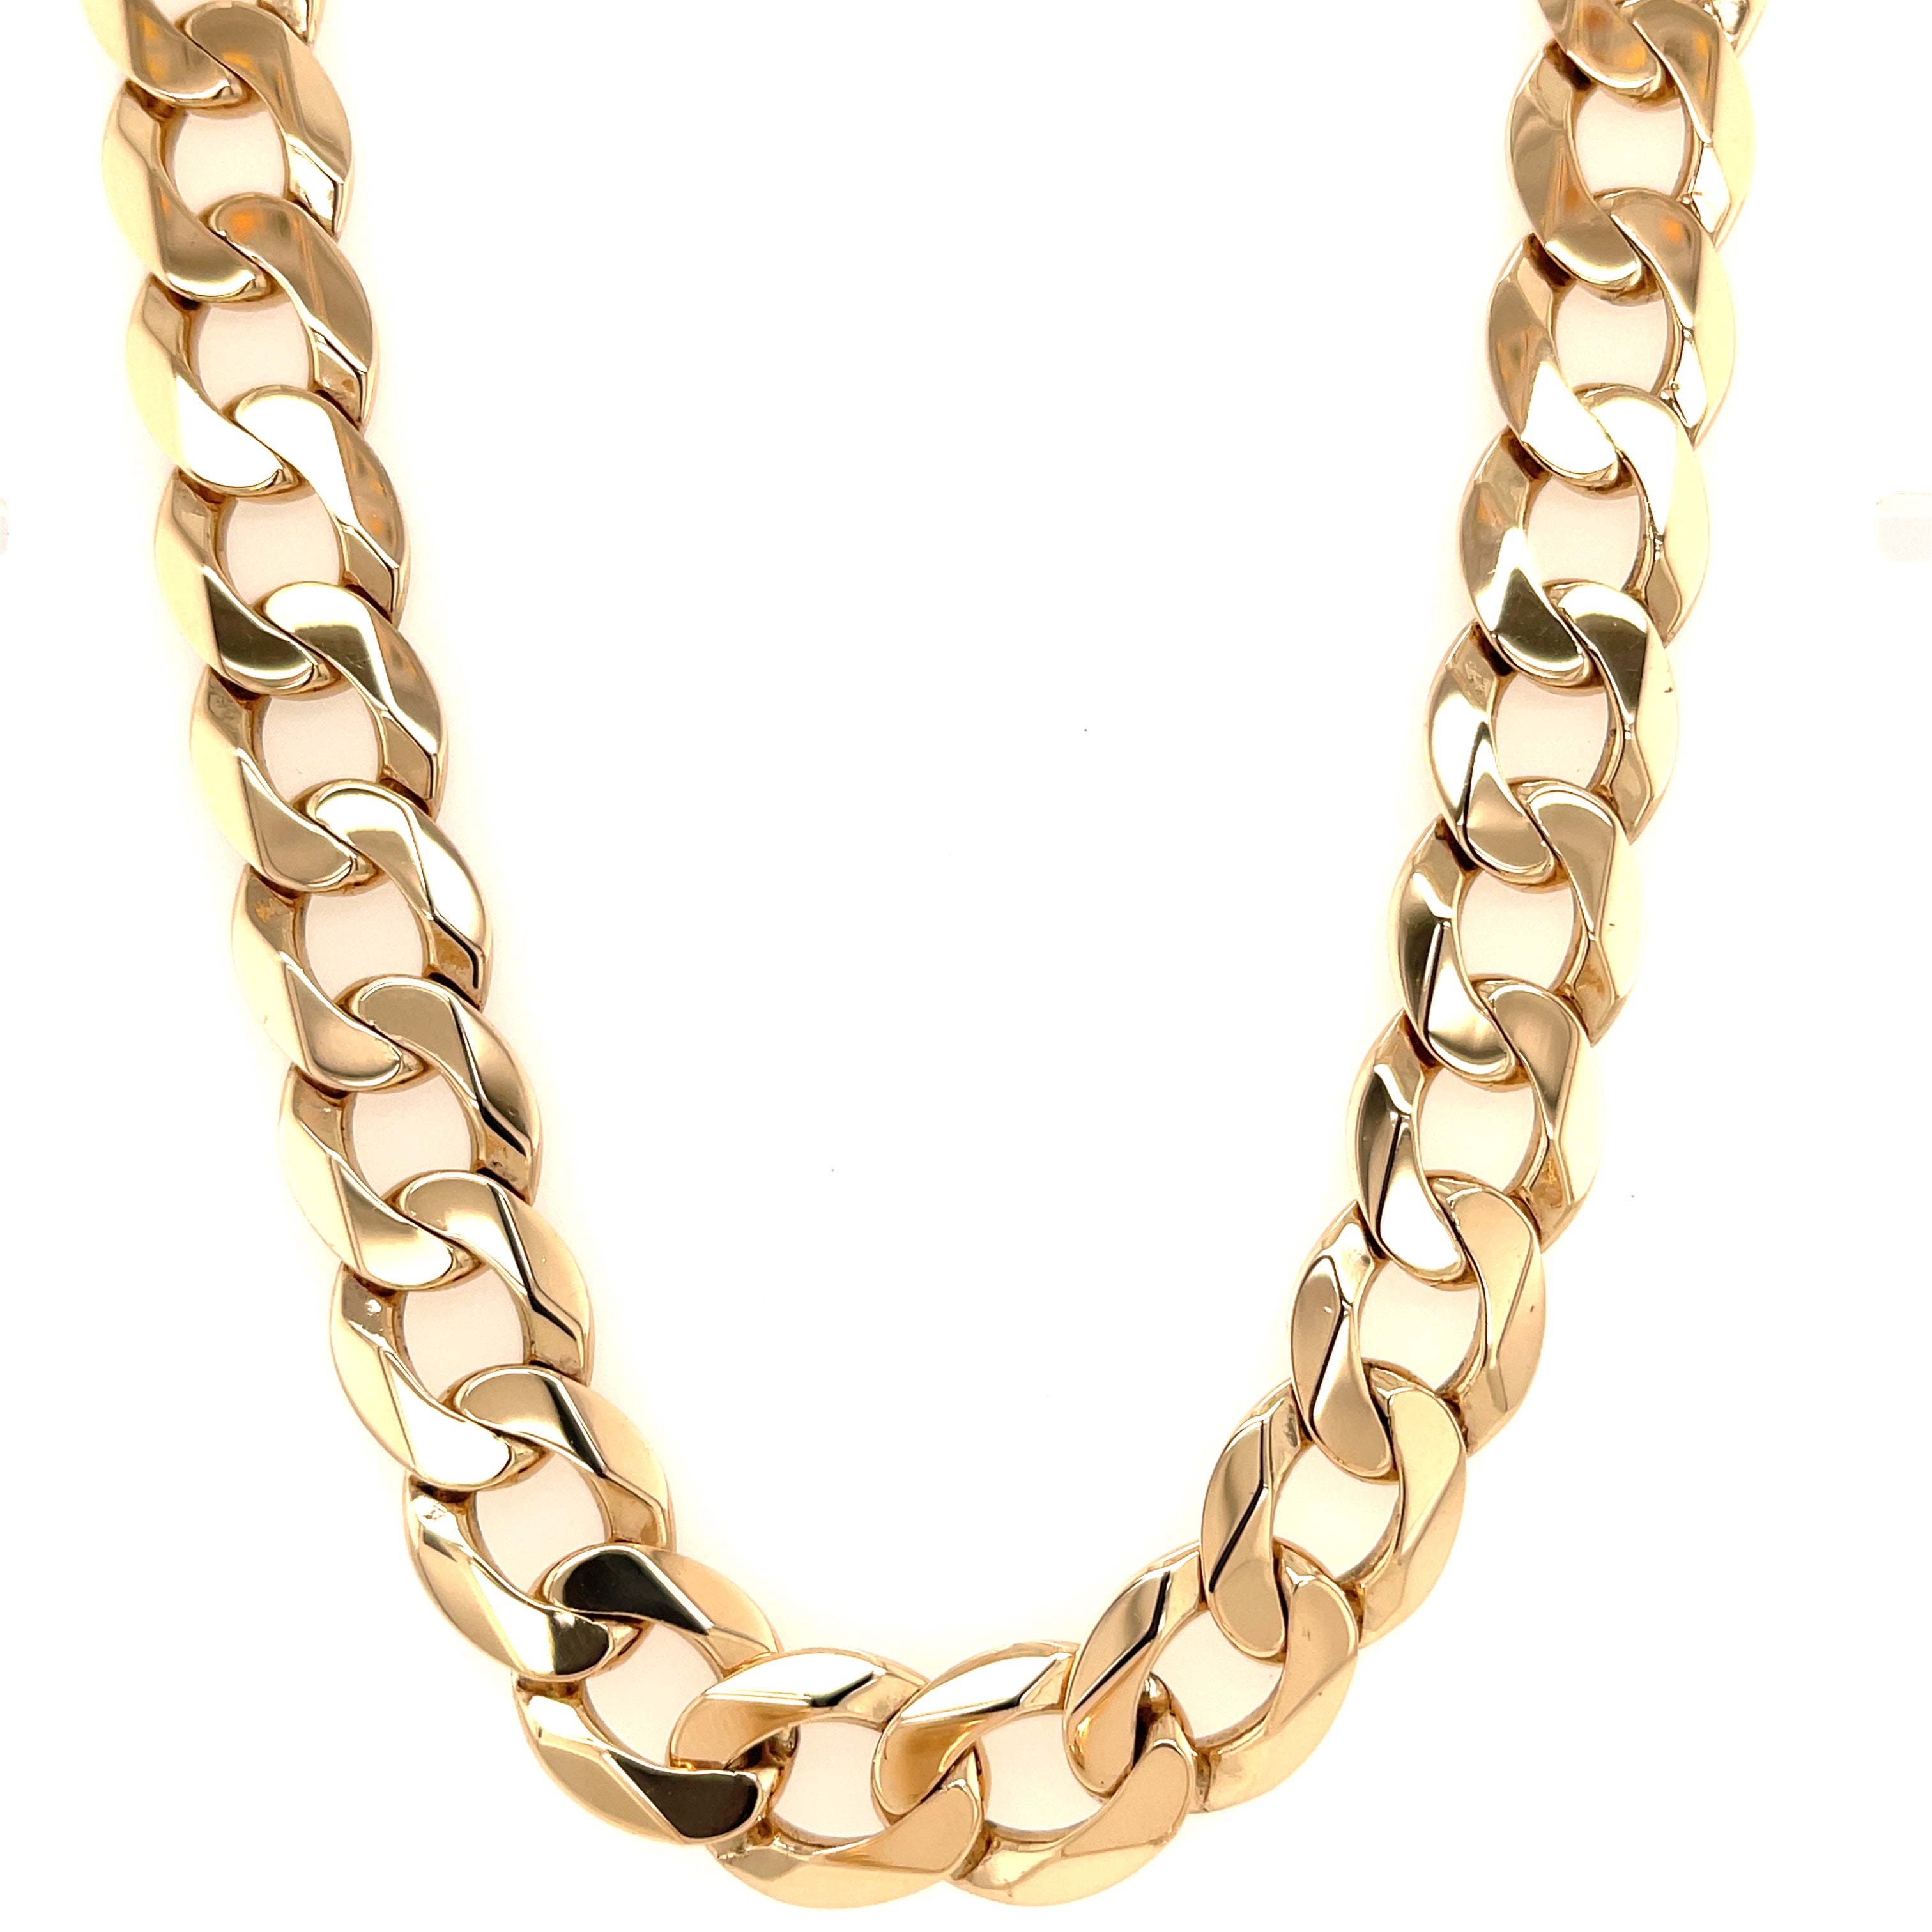 9ct Yellow Gold 22" Heavy 3 Ounce Curb Chain - 88.55g SOLD